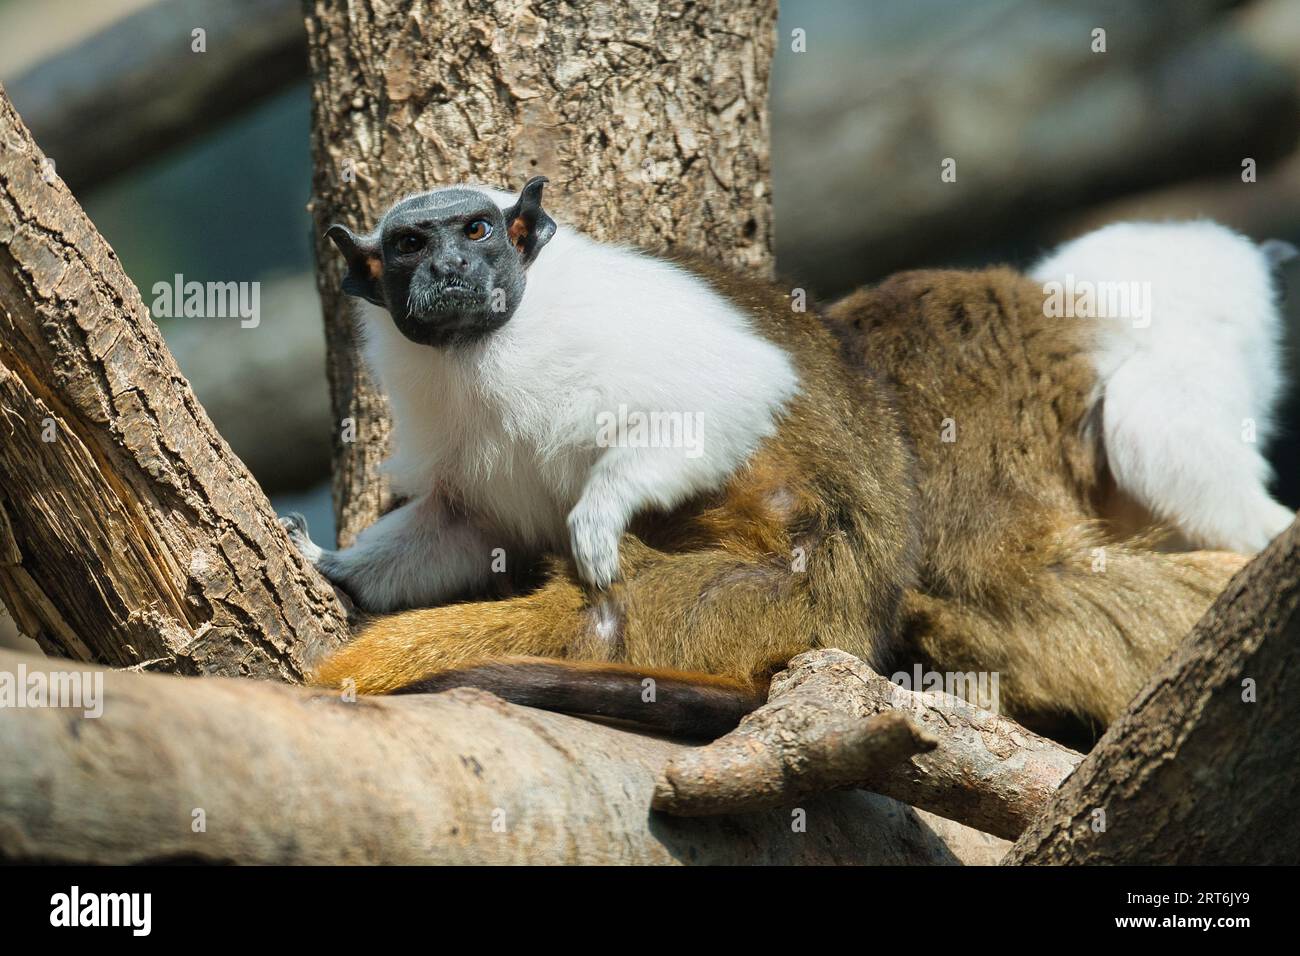 Geoffroy's tamarin in the Paris zoologic park, formerly known as the Bois de Vincennes, 12th arrondissement of Paris, which covers an area of 14.5 hec Stock Photo